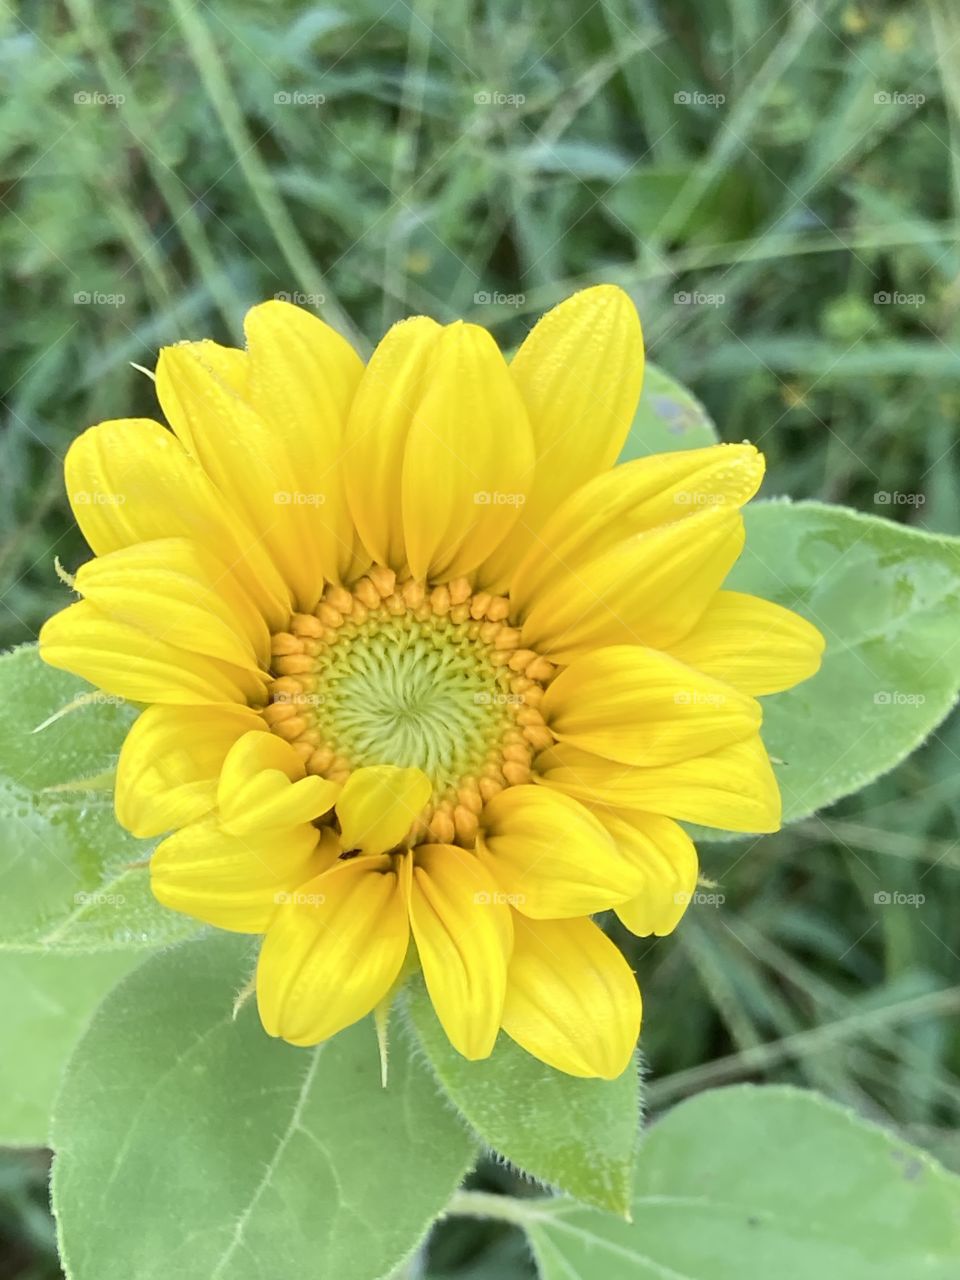 This is a portrait of a very pretty, yellow sunflower.